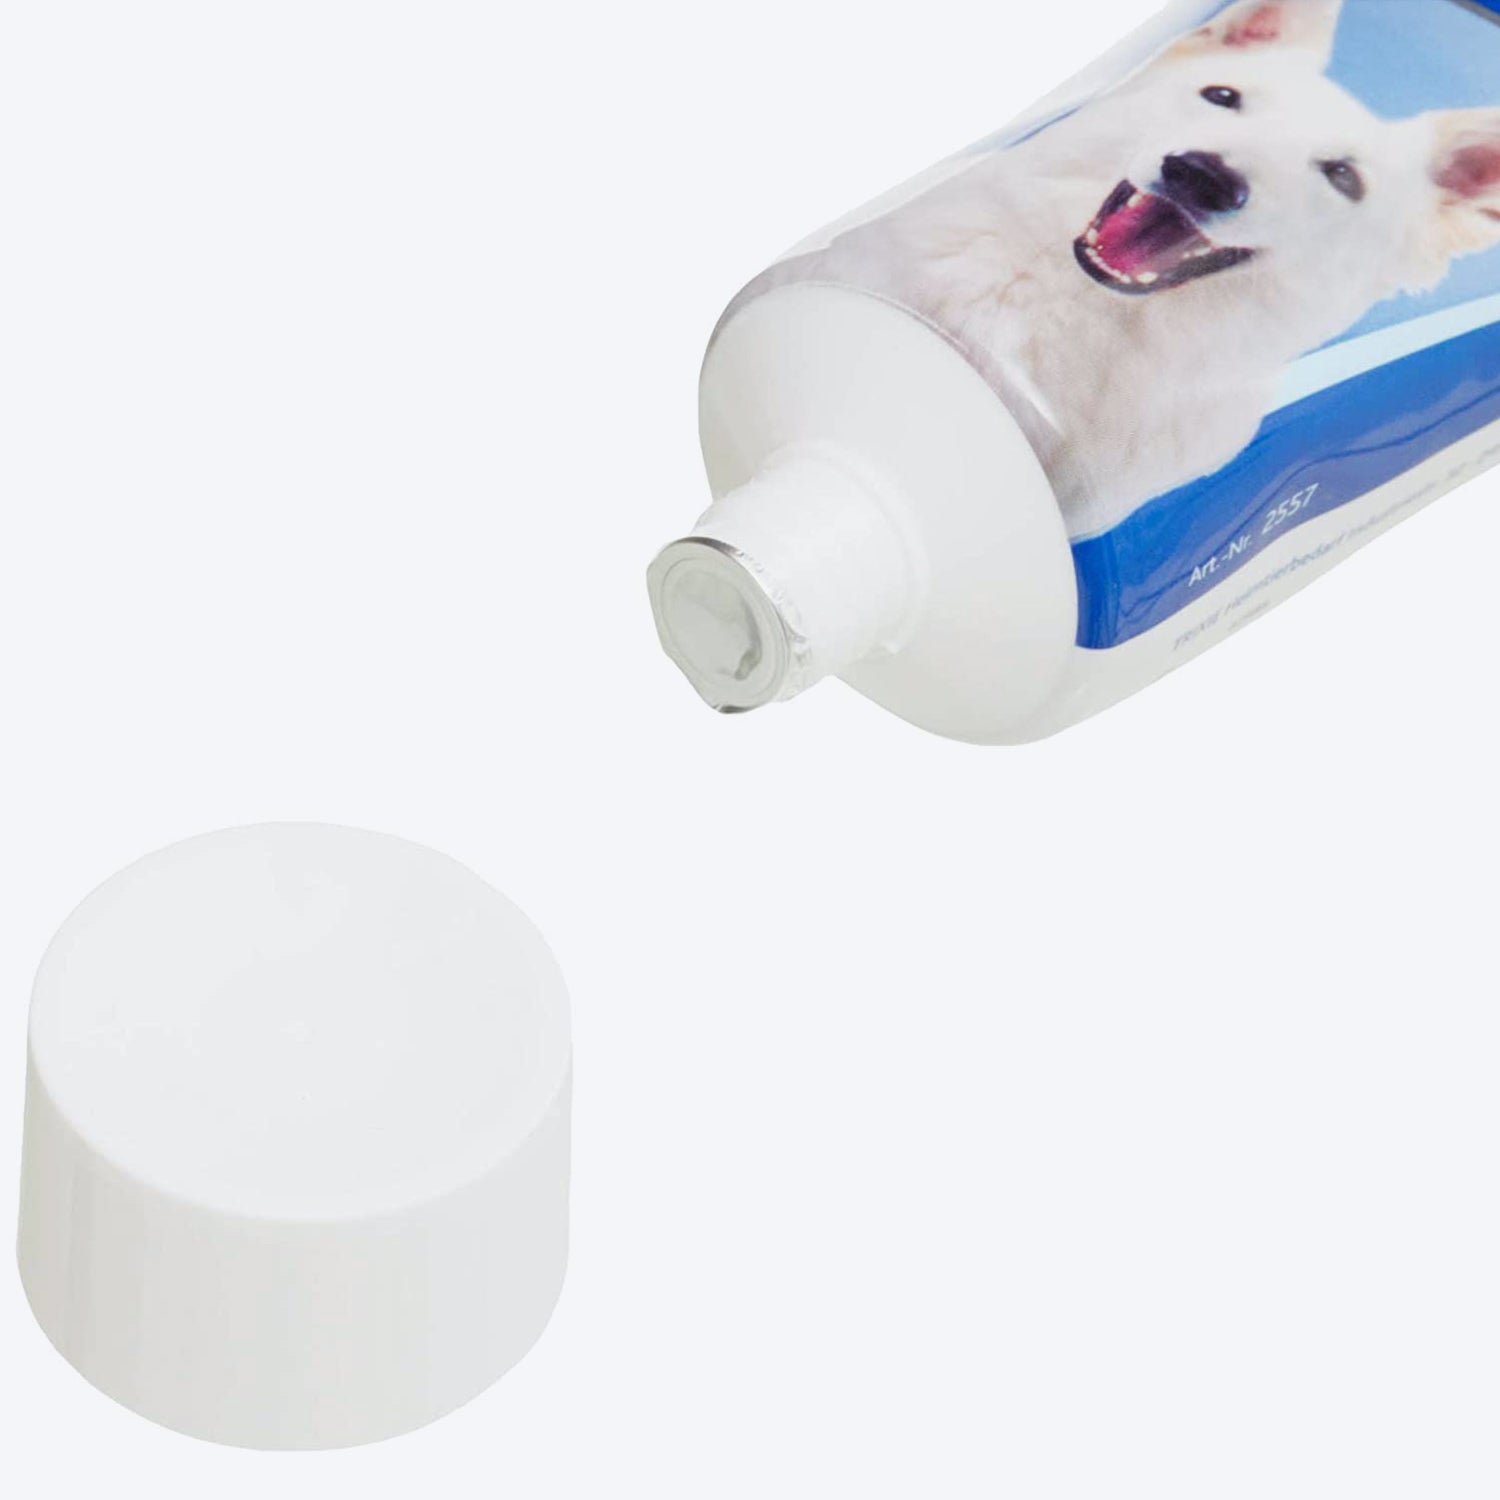 Trixie Dog Toothpaste with Mint - 100 g - Heads Up For Tails